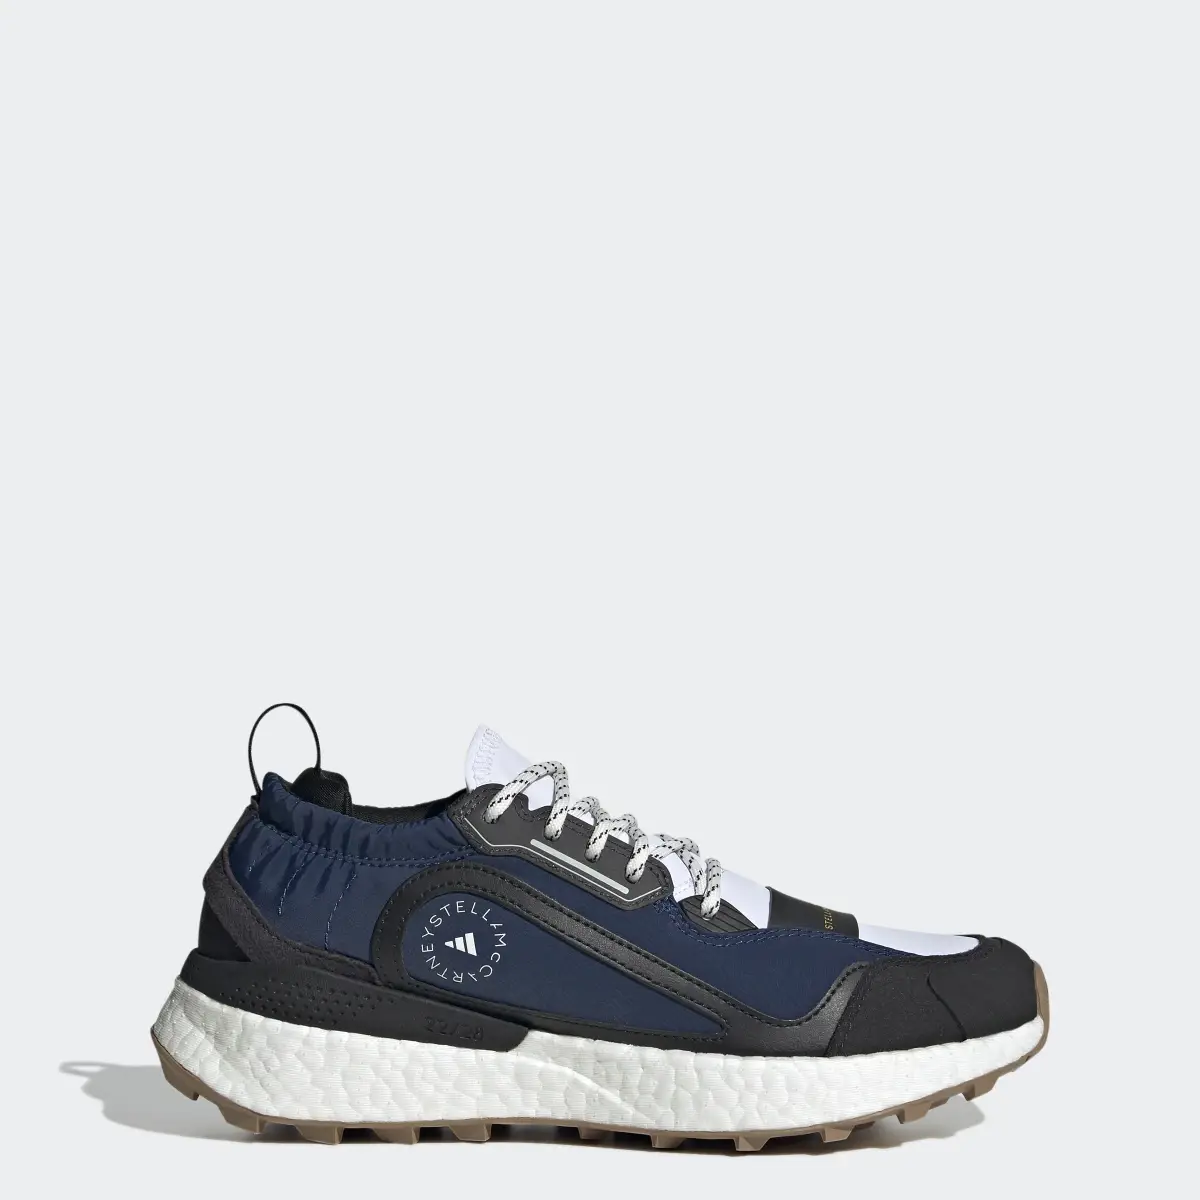 Adidas by Stella McCartney Outdoorboost 2.0 COLD.RDY Laufschuh. 1